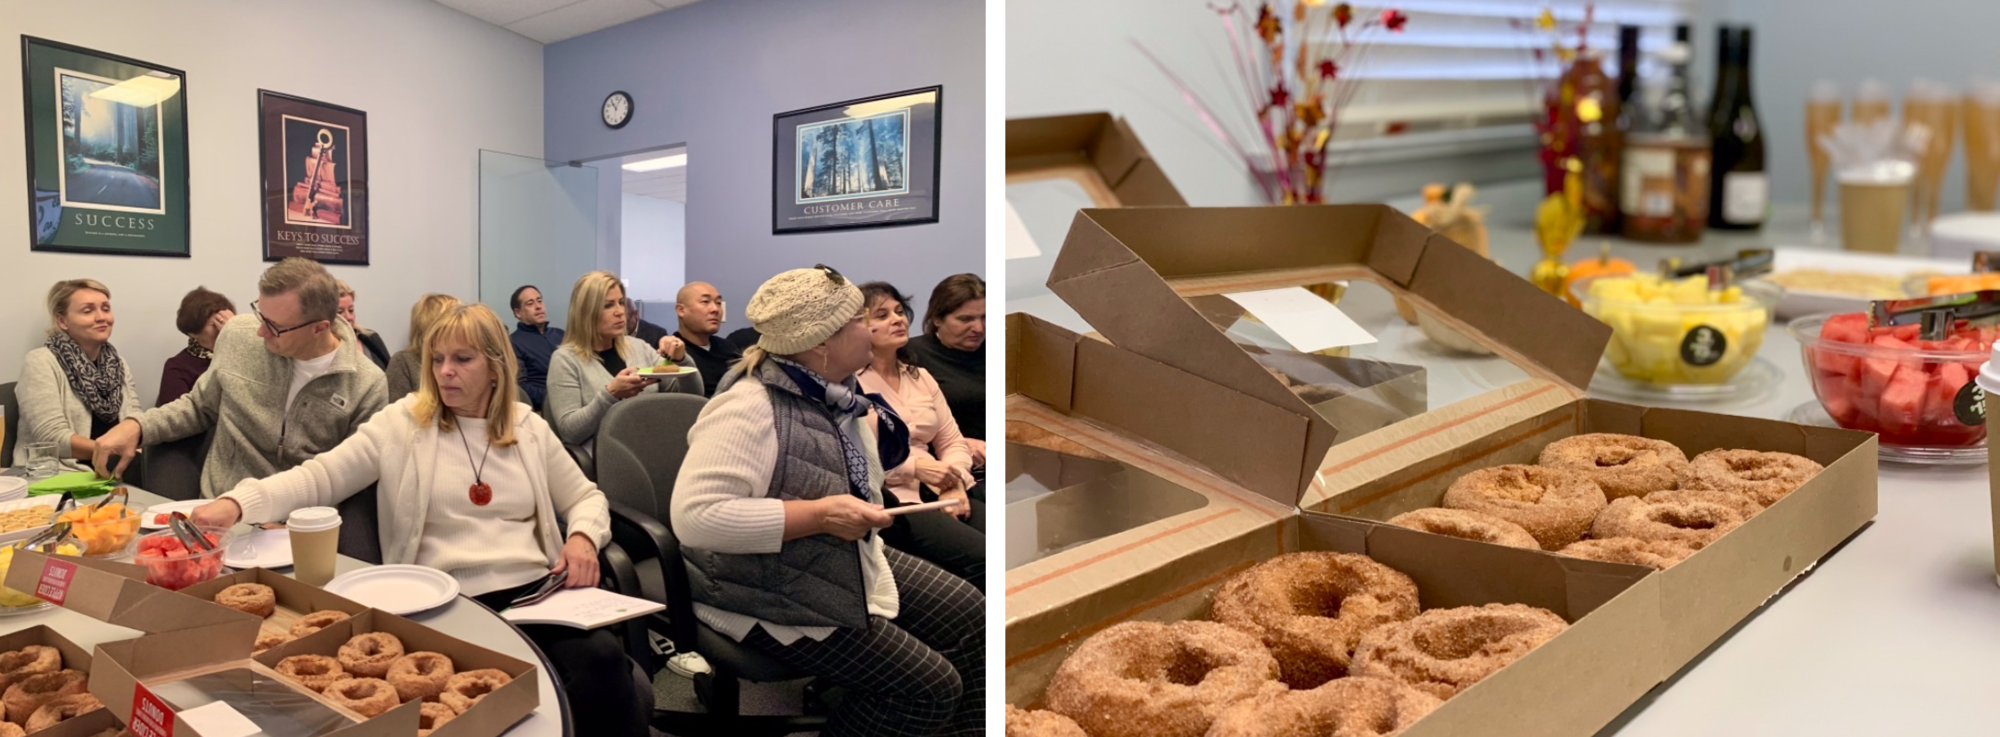 Agents in chairs getting fall treats and a table with donuts